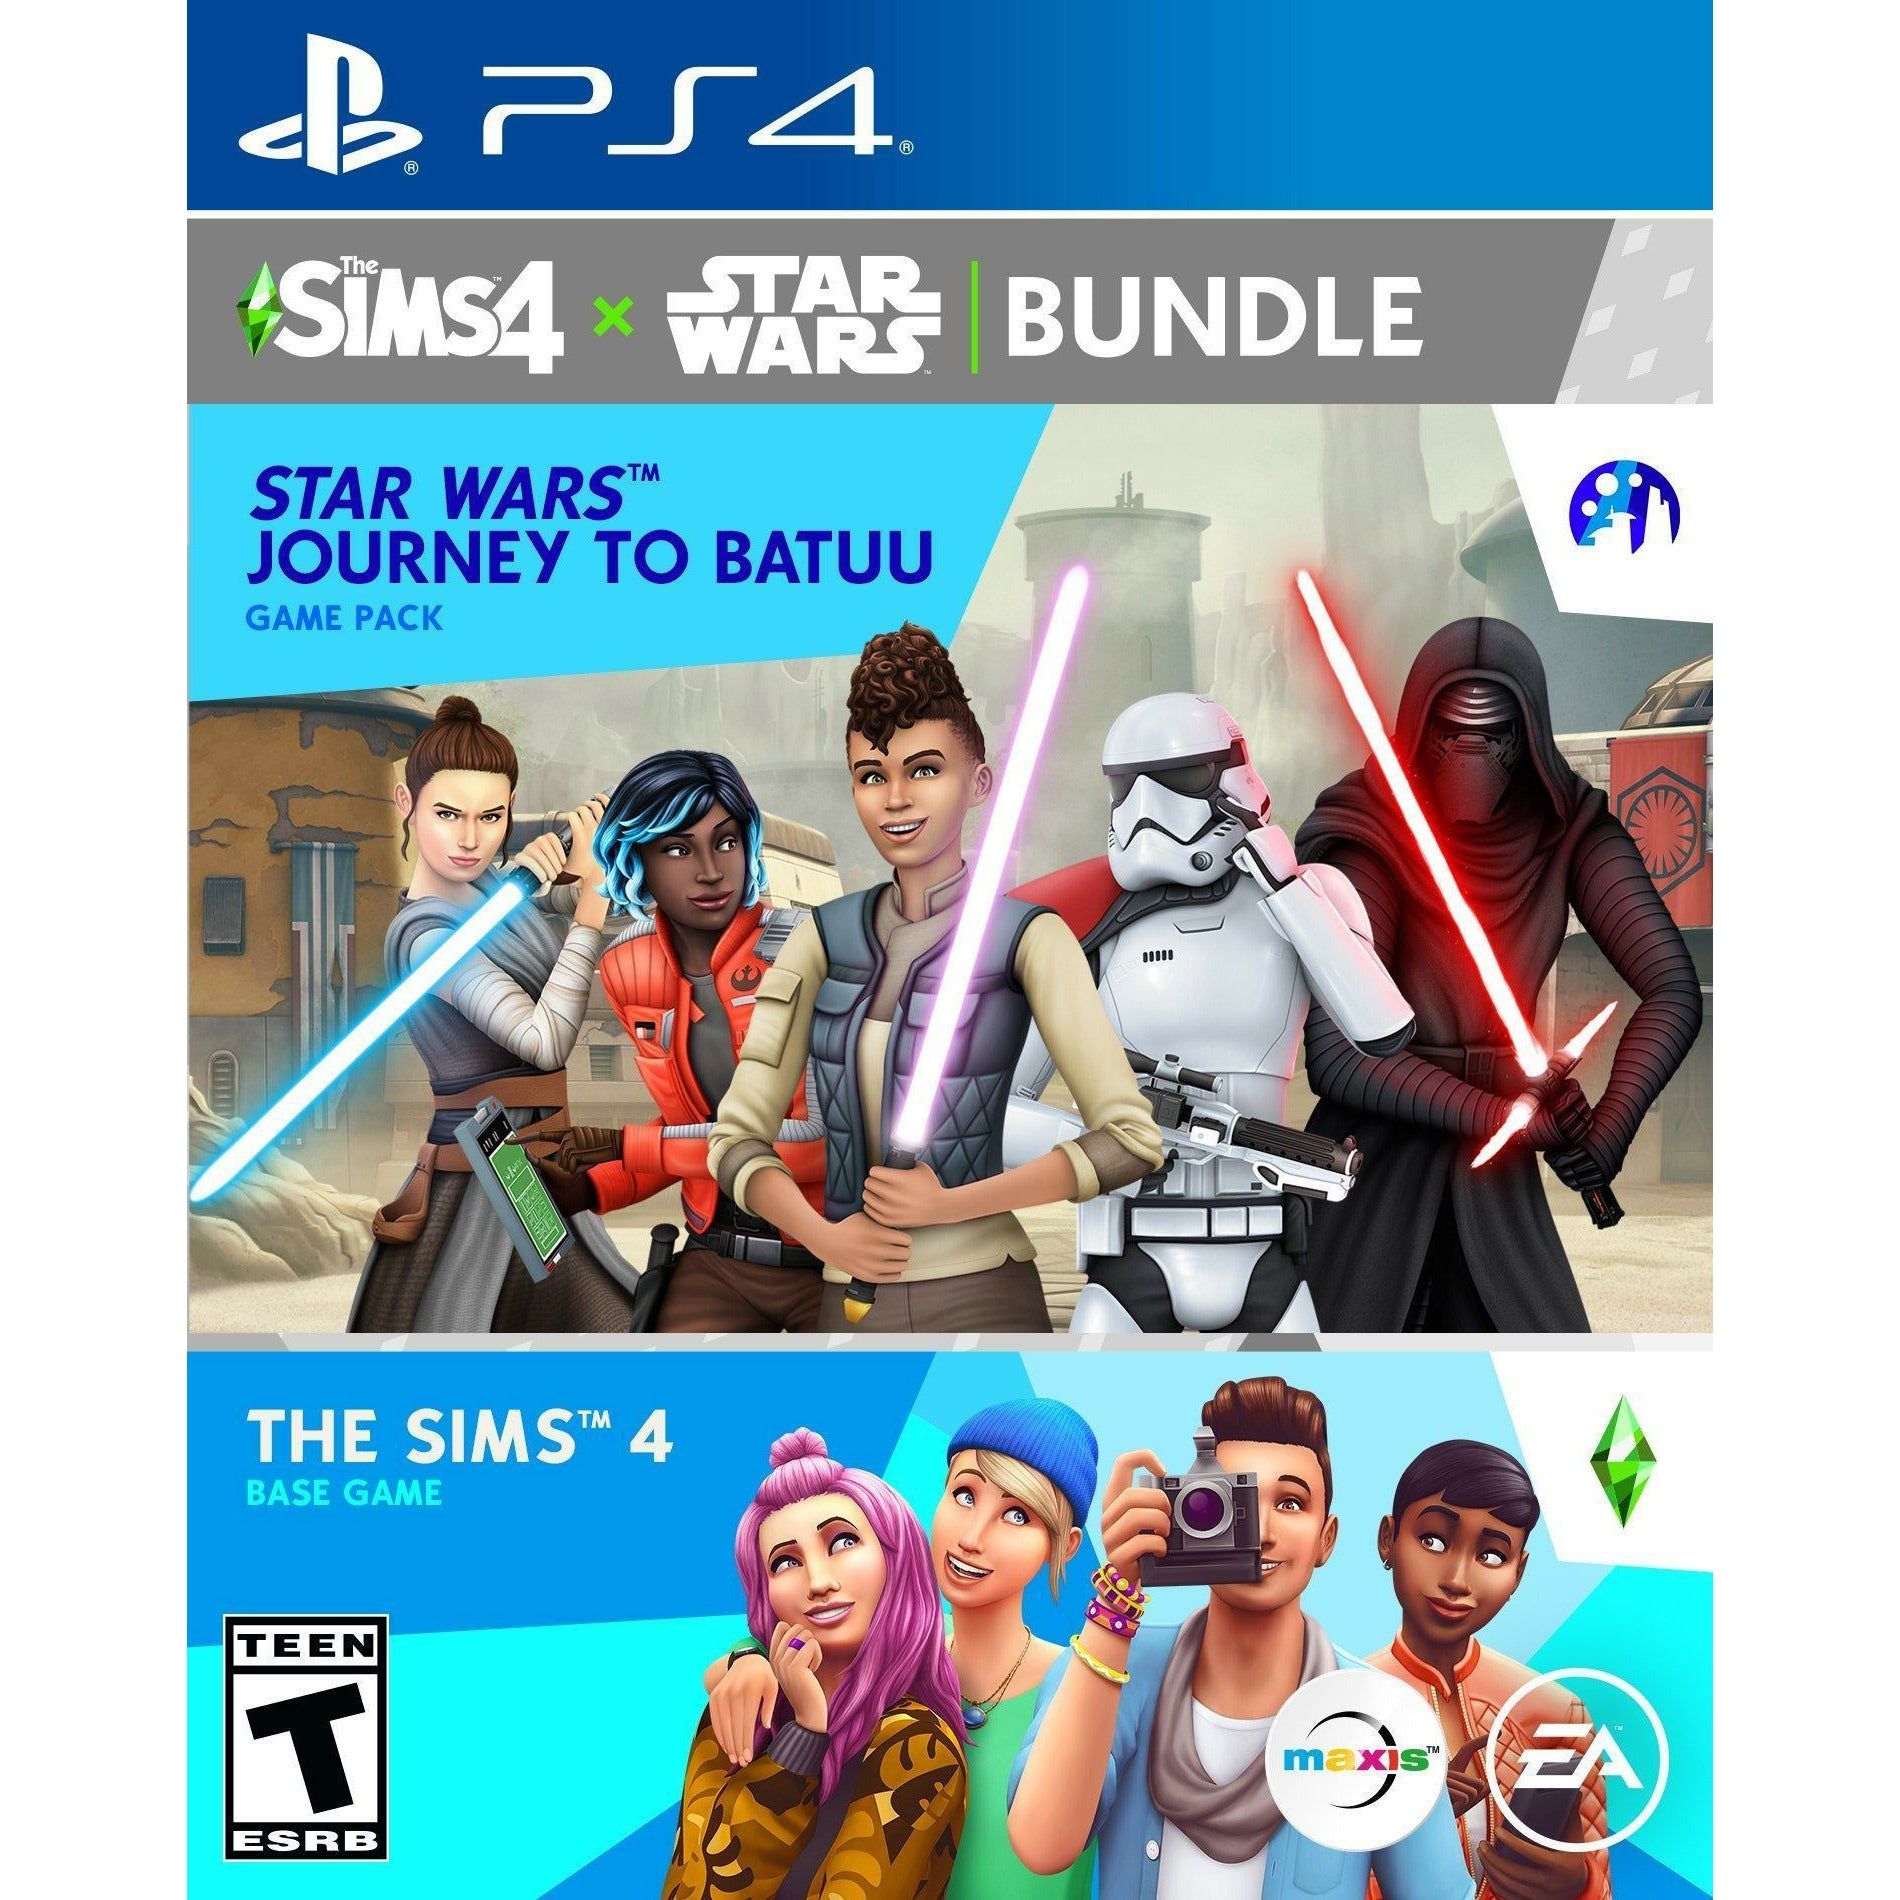 PS4 - The Sims 4 X Star Wars Bundle